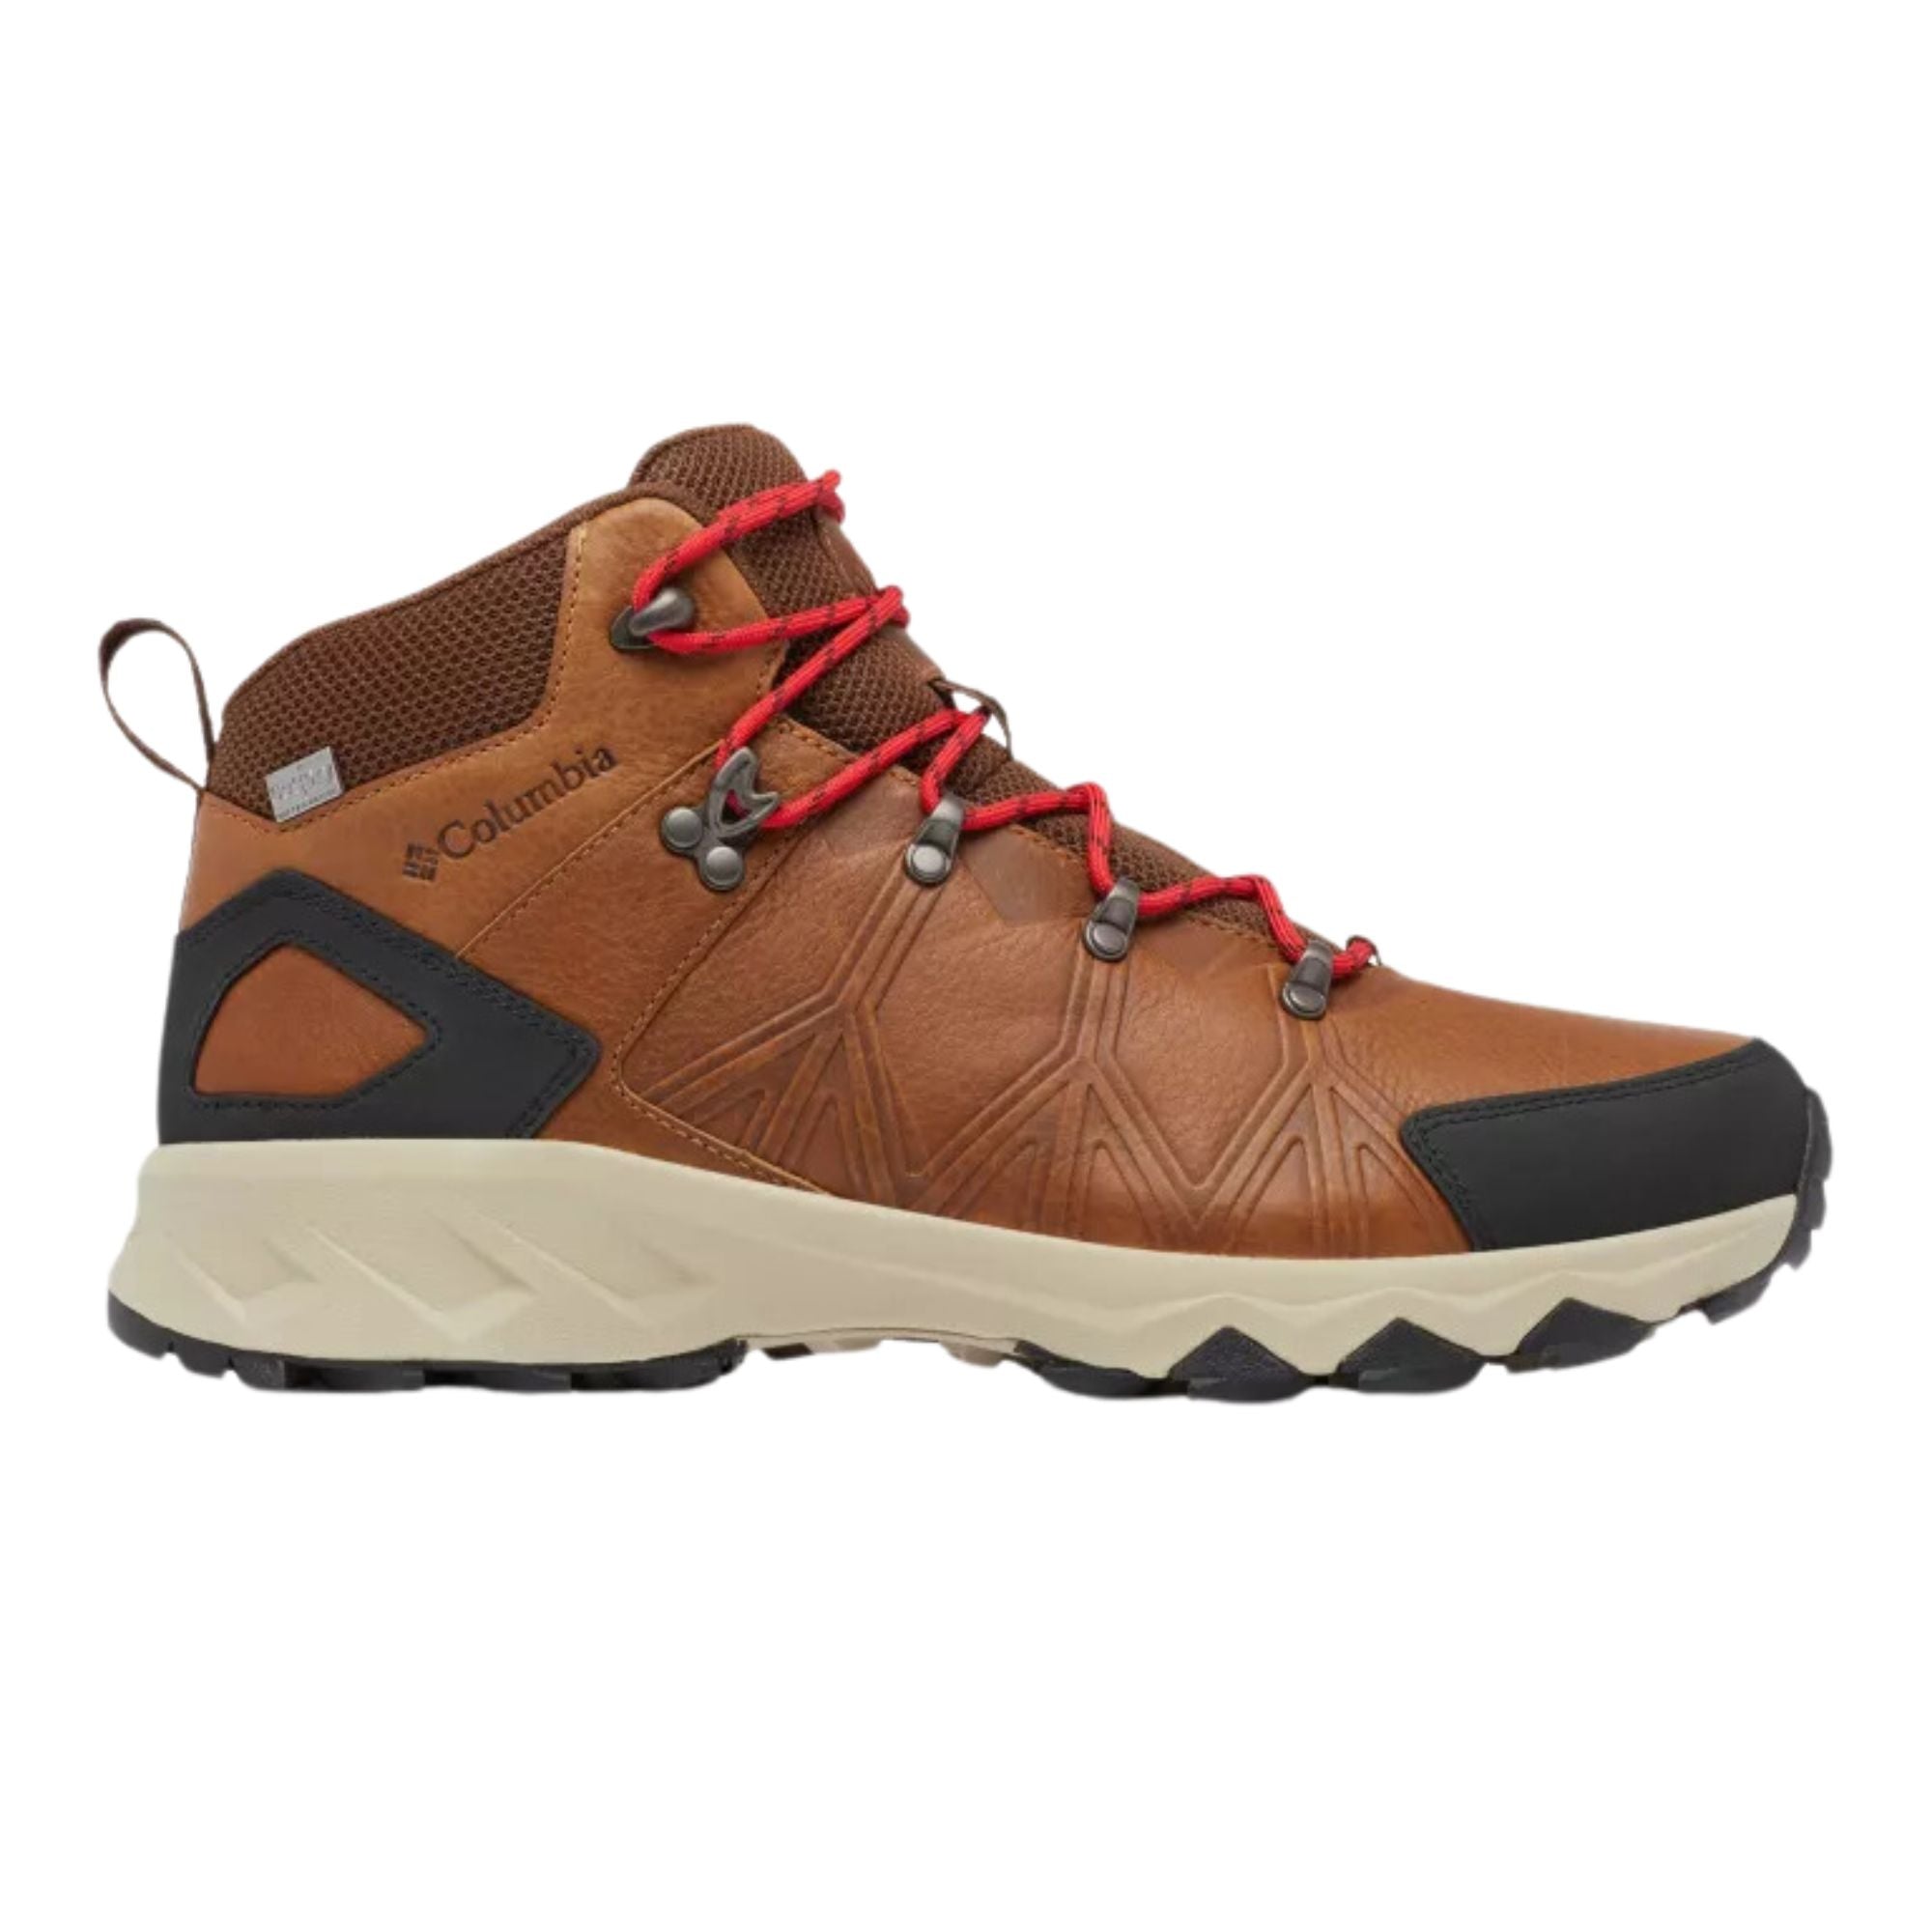 Columbia Men's Peakfreak II Mid Outdry Waterproof Leather Hiking Boots | Columbia | Portwest - The Outdoor Shop